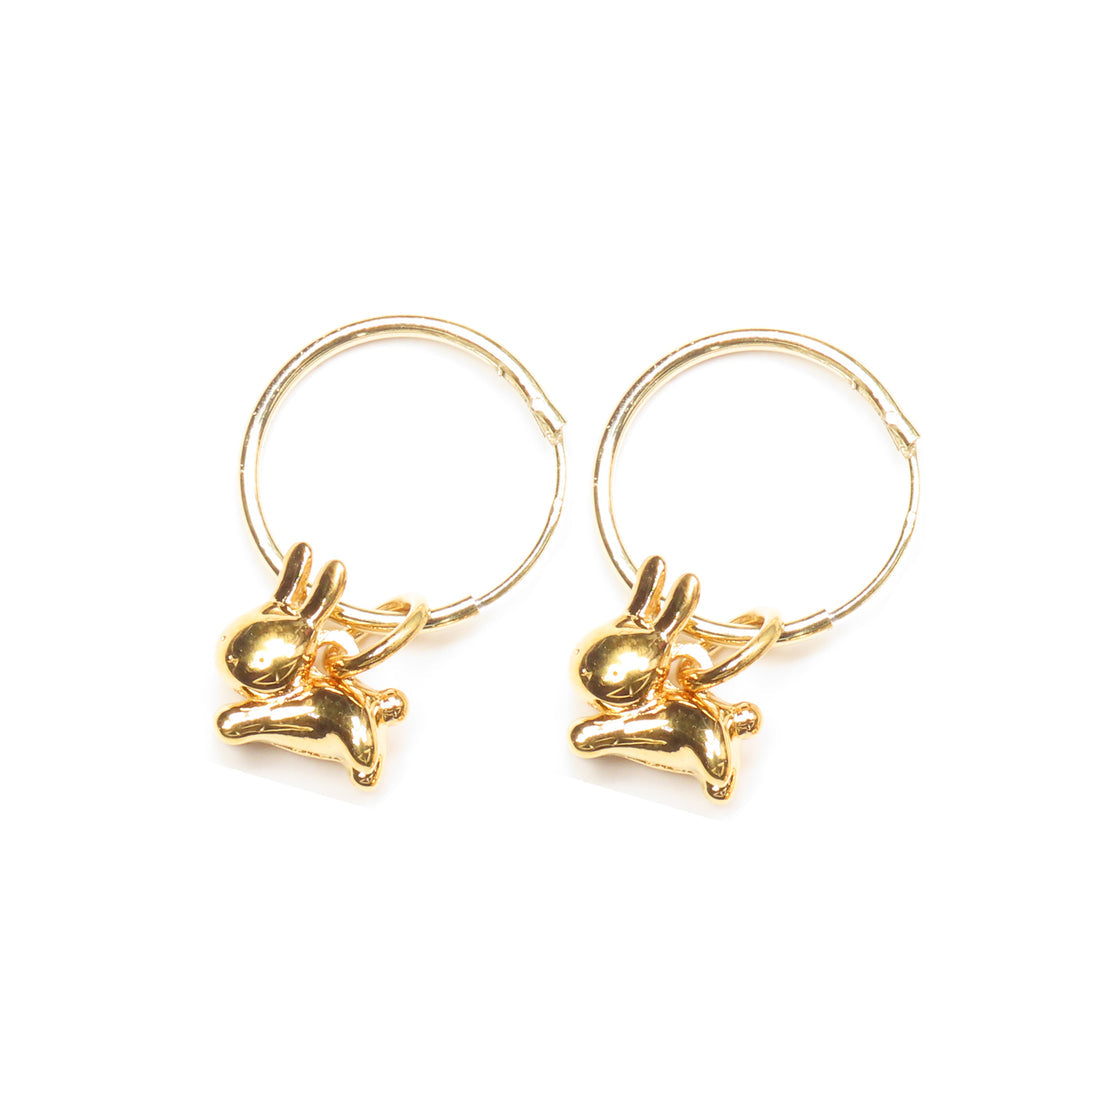 Miffy Year of the Rabbit Leaping Hoop Earrings Gold